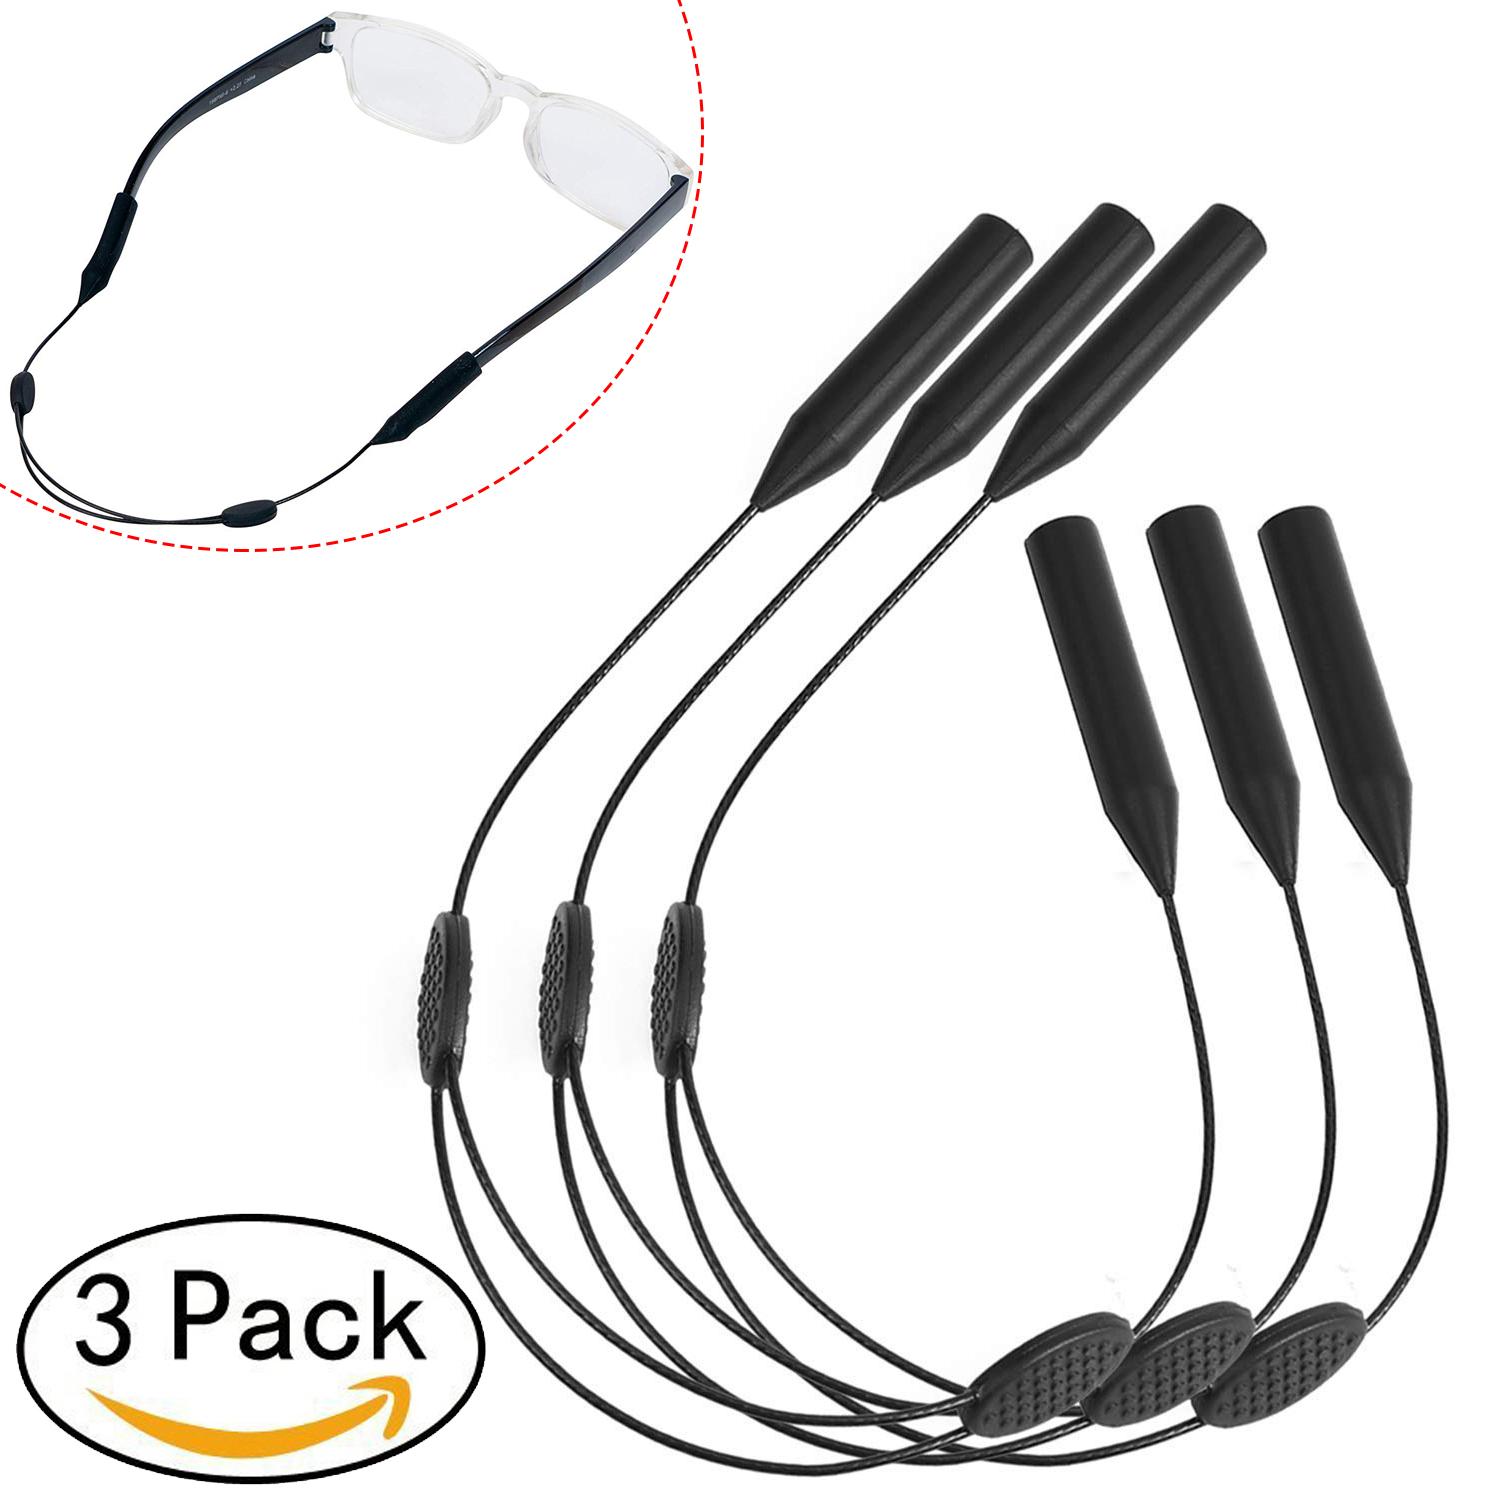 4 Pack Universal Fit Sports Sunglasses Retainer Black MoKo Adjustable Eyewear Retainer, Women Unisex Sunglass Strap Safety Glasses Holder with Large Round-Head for Men 